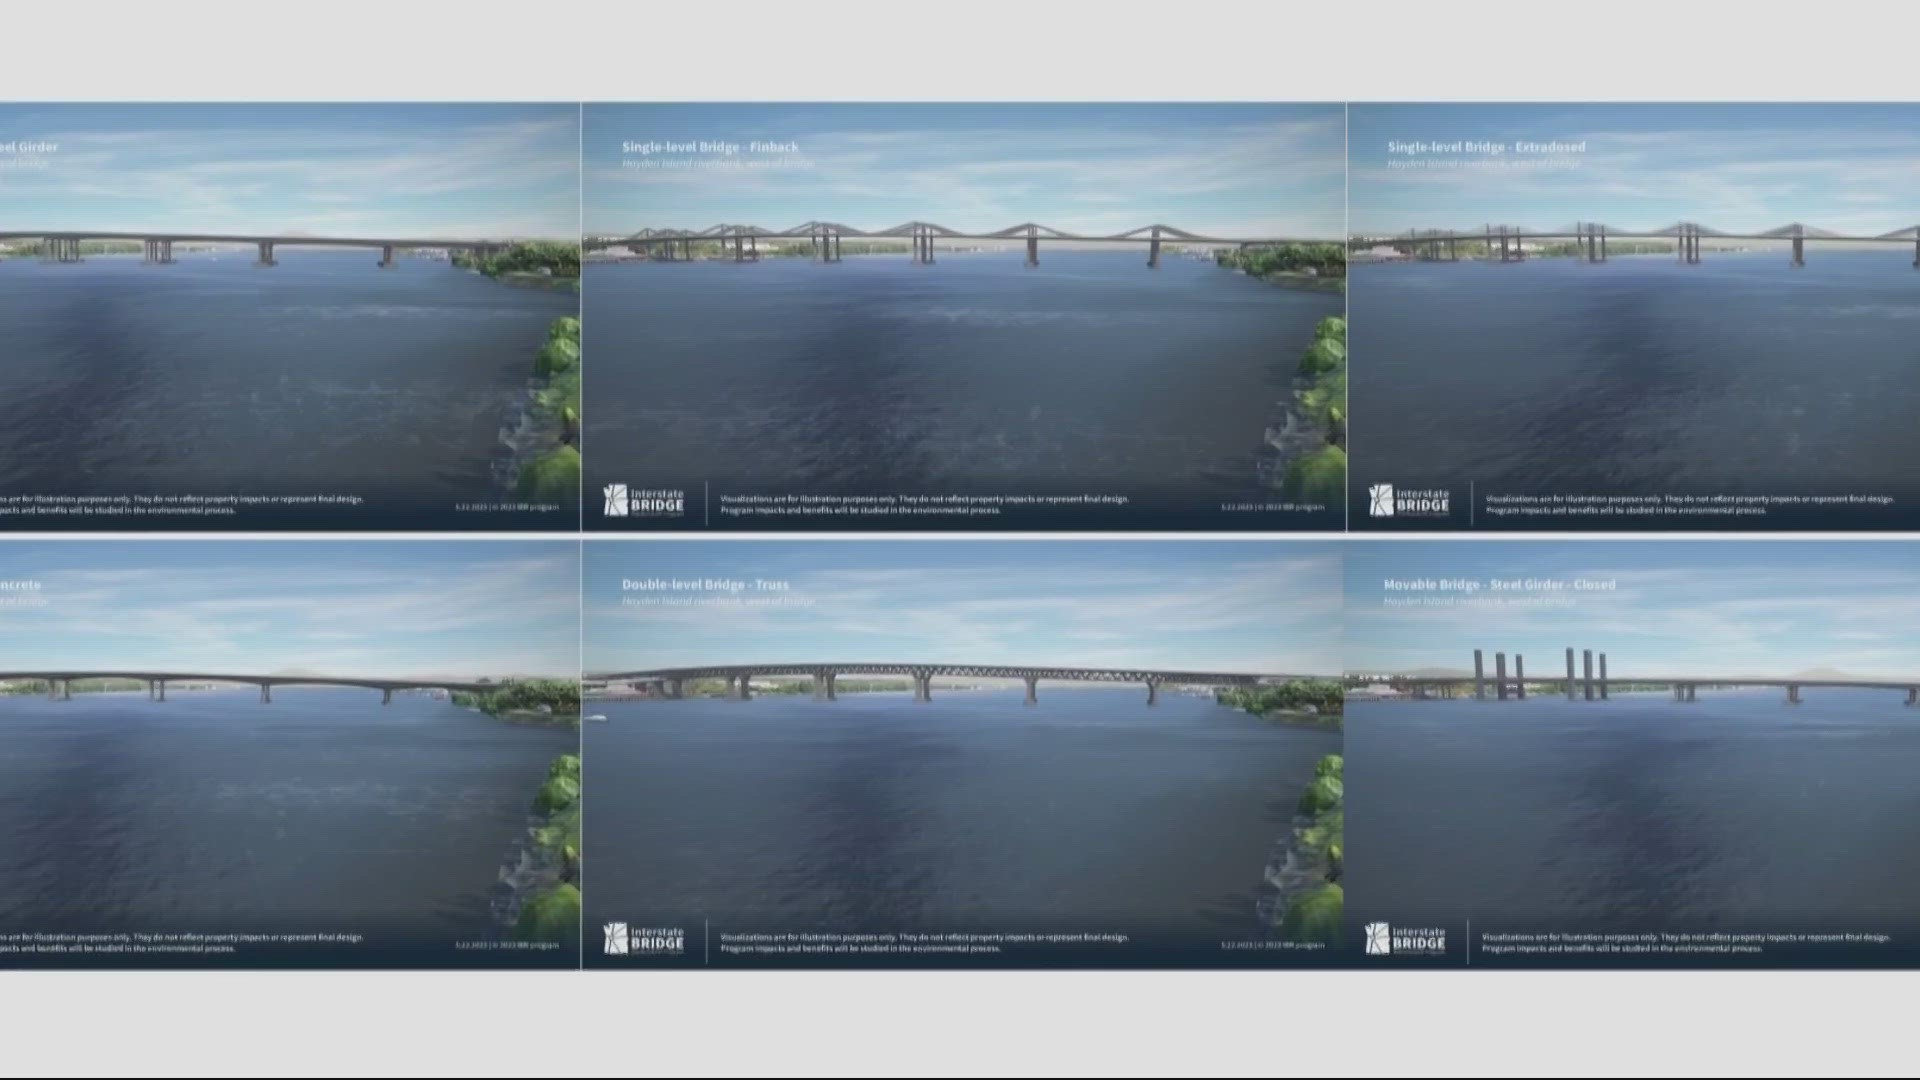 The renders showed six design options for the planned replacement crossing, including a box girder design like the I-205 bridge and a partial cable-stayed version.